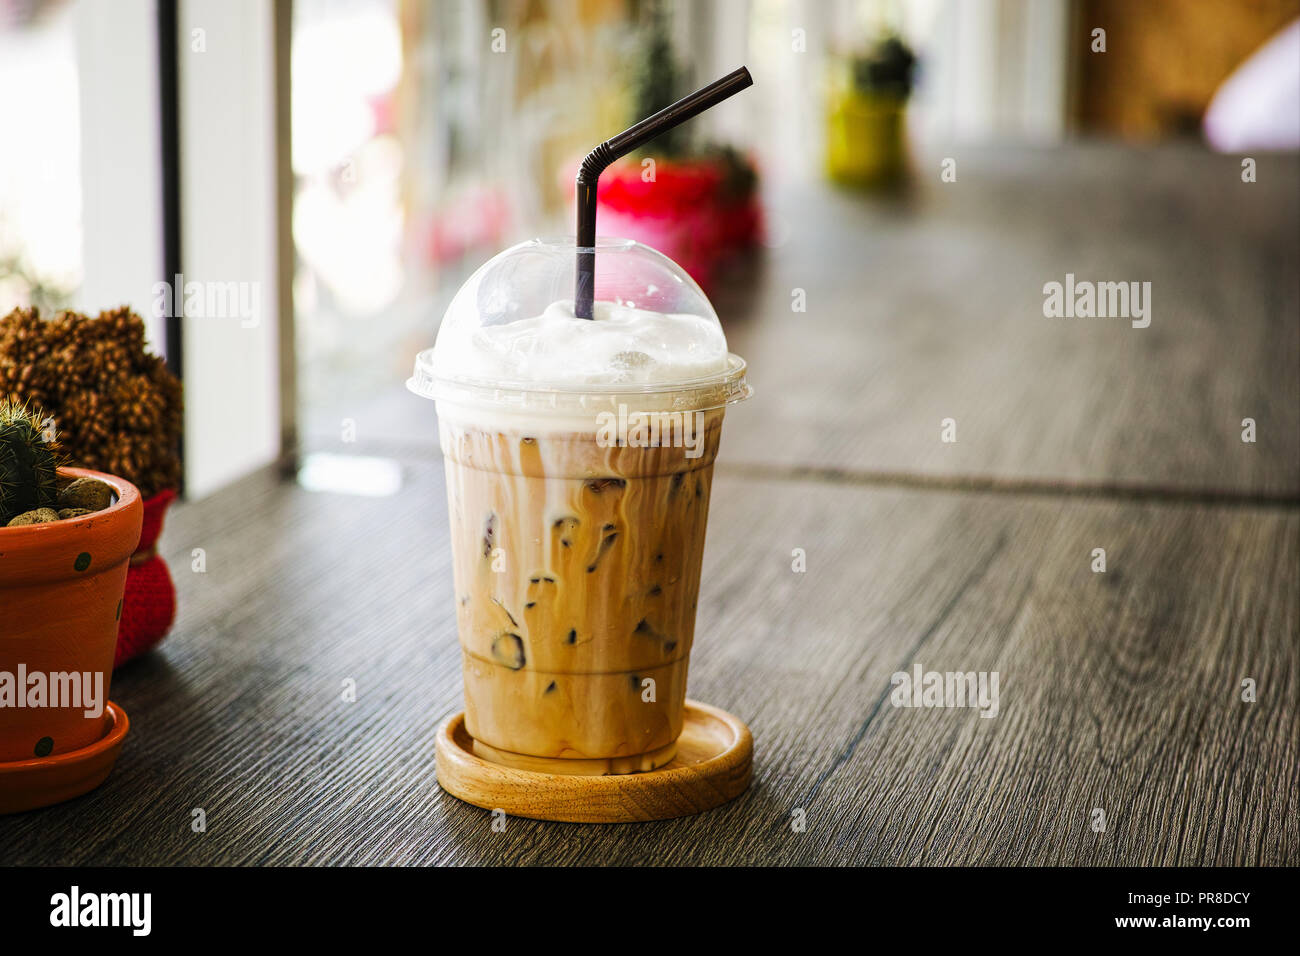 Cold Iced Coffee in plastic glass on table in the coffee cafe Stock Photo